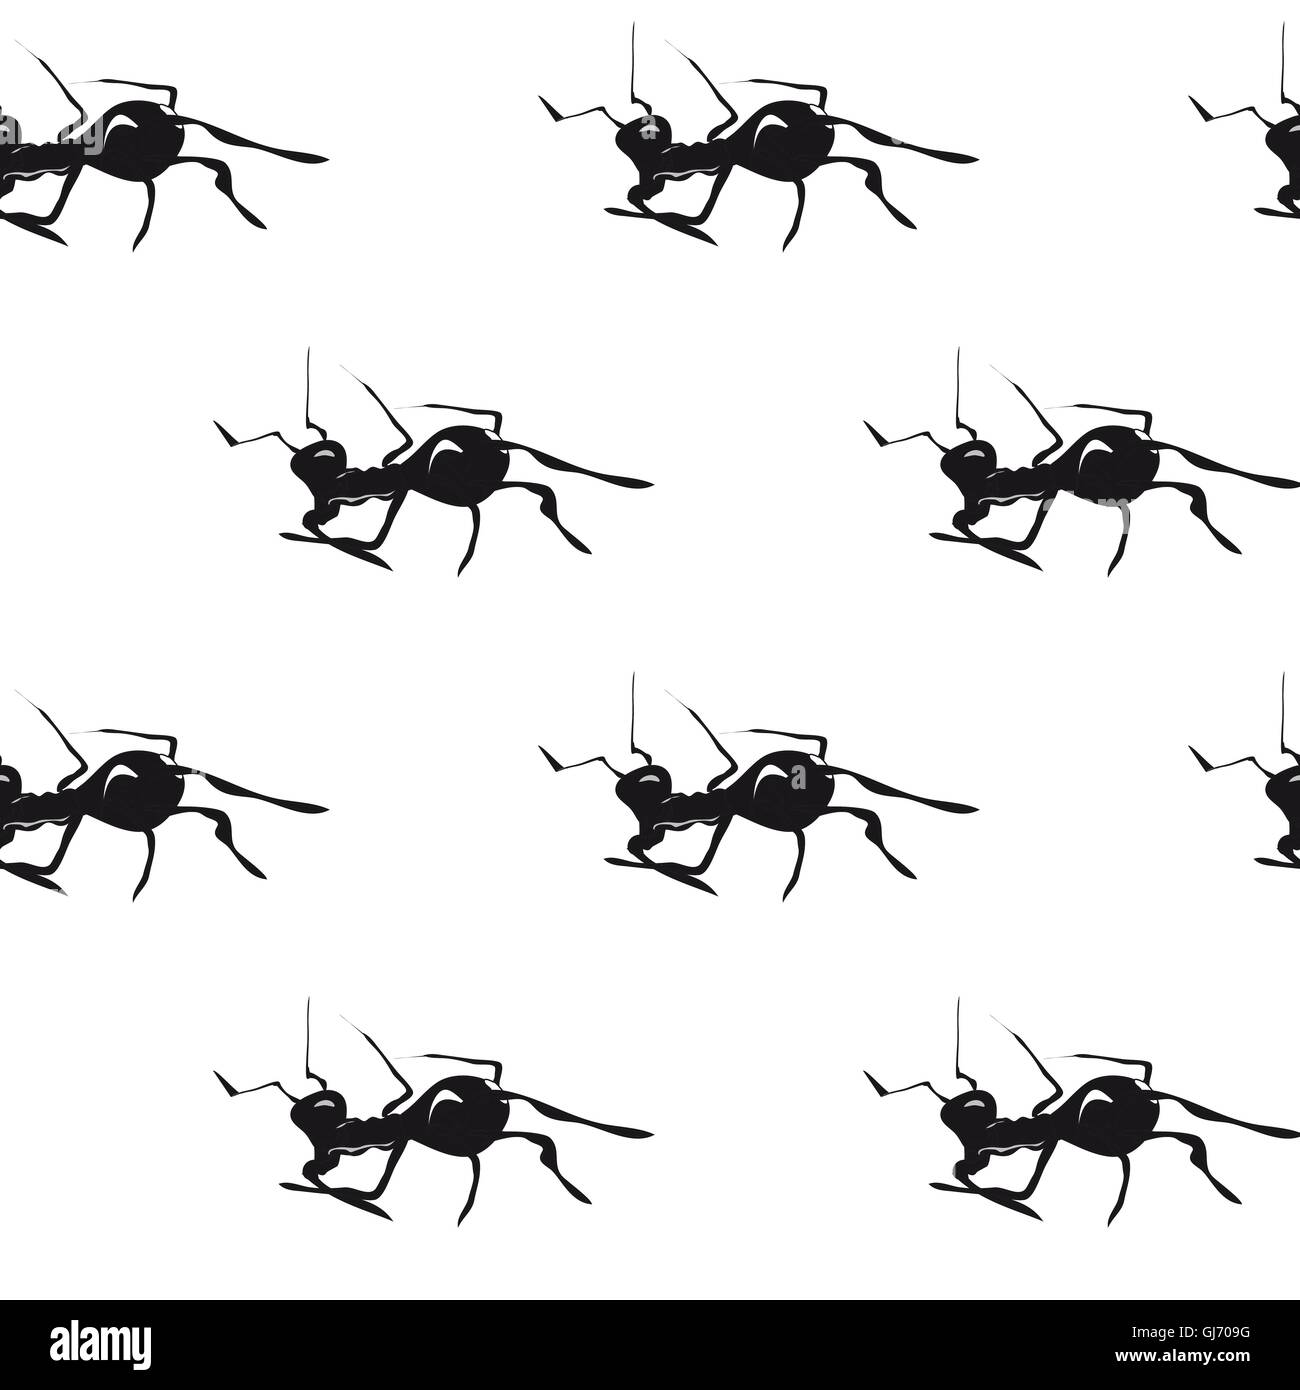 Ants. Hand drawn vector seamless pattern. Stock Vector